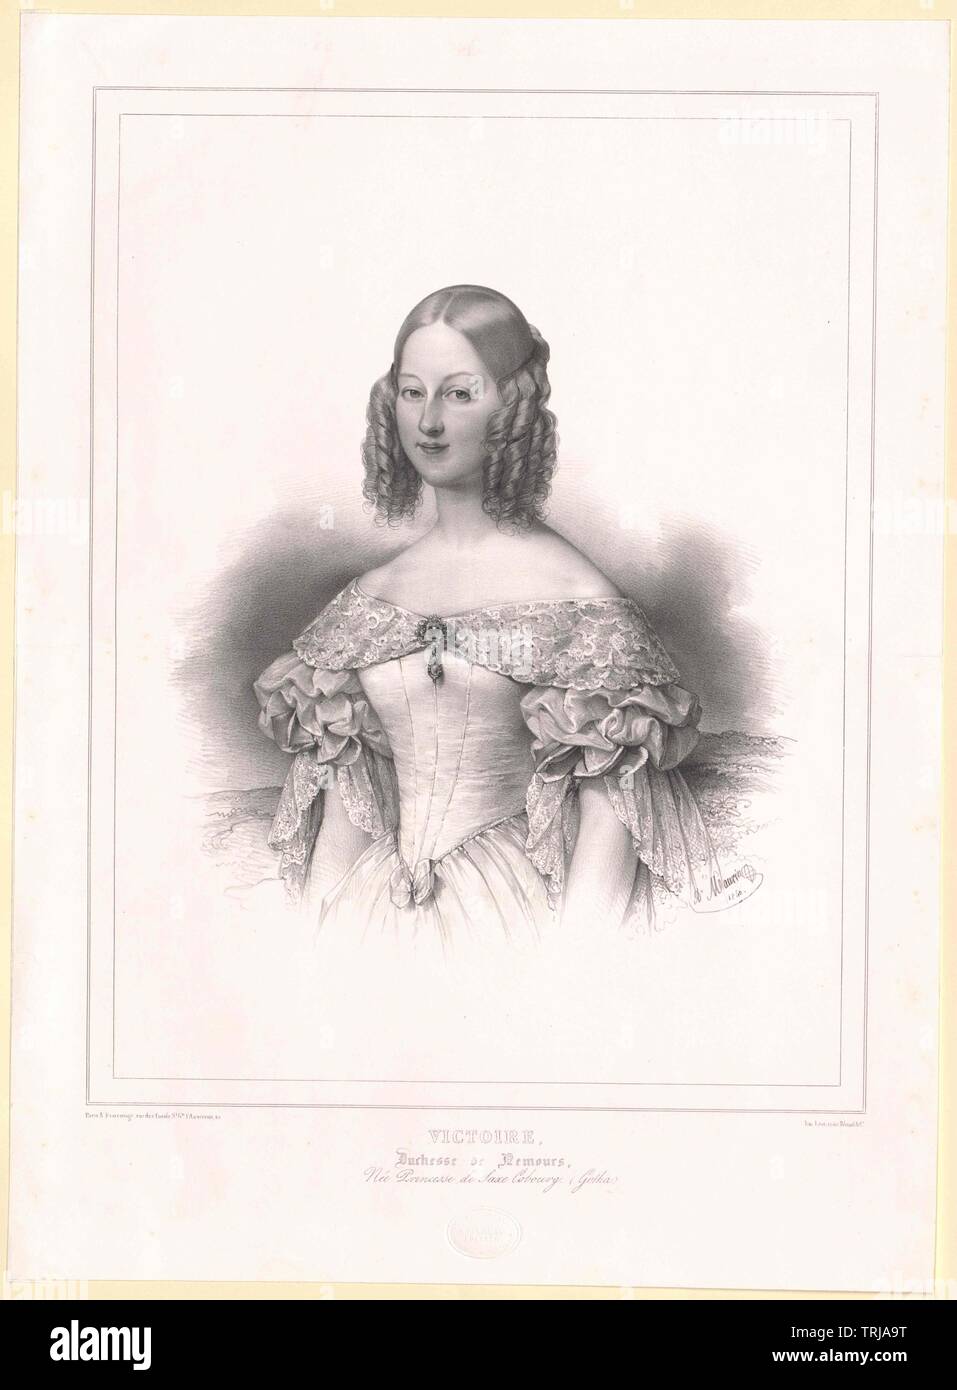 Victoria, princesse de Saxe-Cobourg-Gotha,-Additional-Rights Clearance-Info-Not-Available Banque D'Images